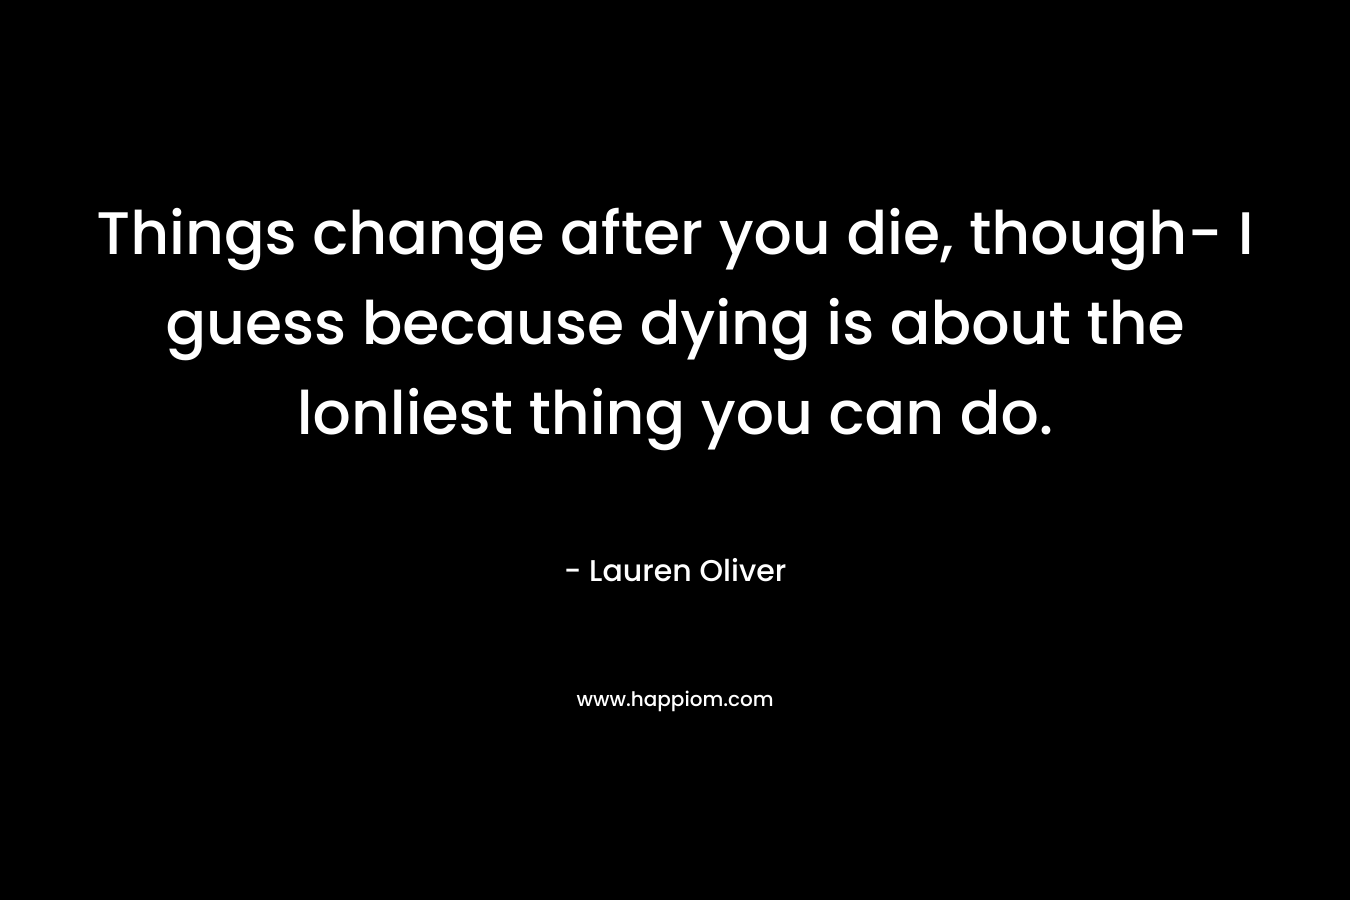 Things change after you die, though- I guess because dying is about the lonliest thing you can do. – Lauren Oliver